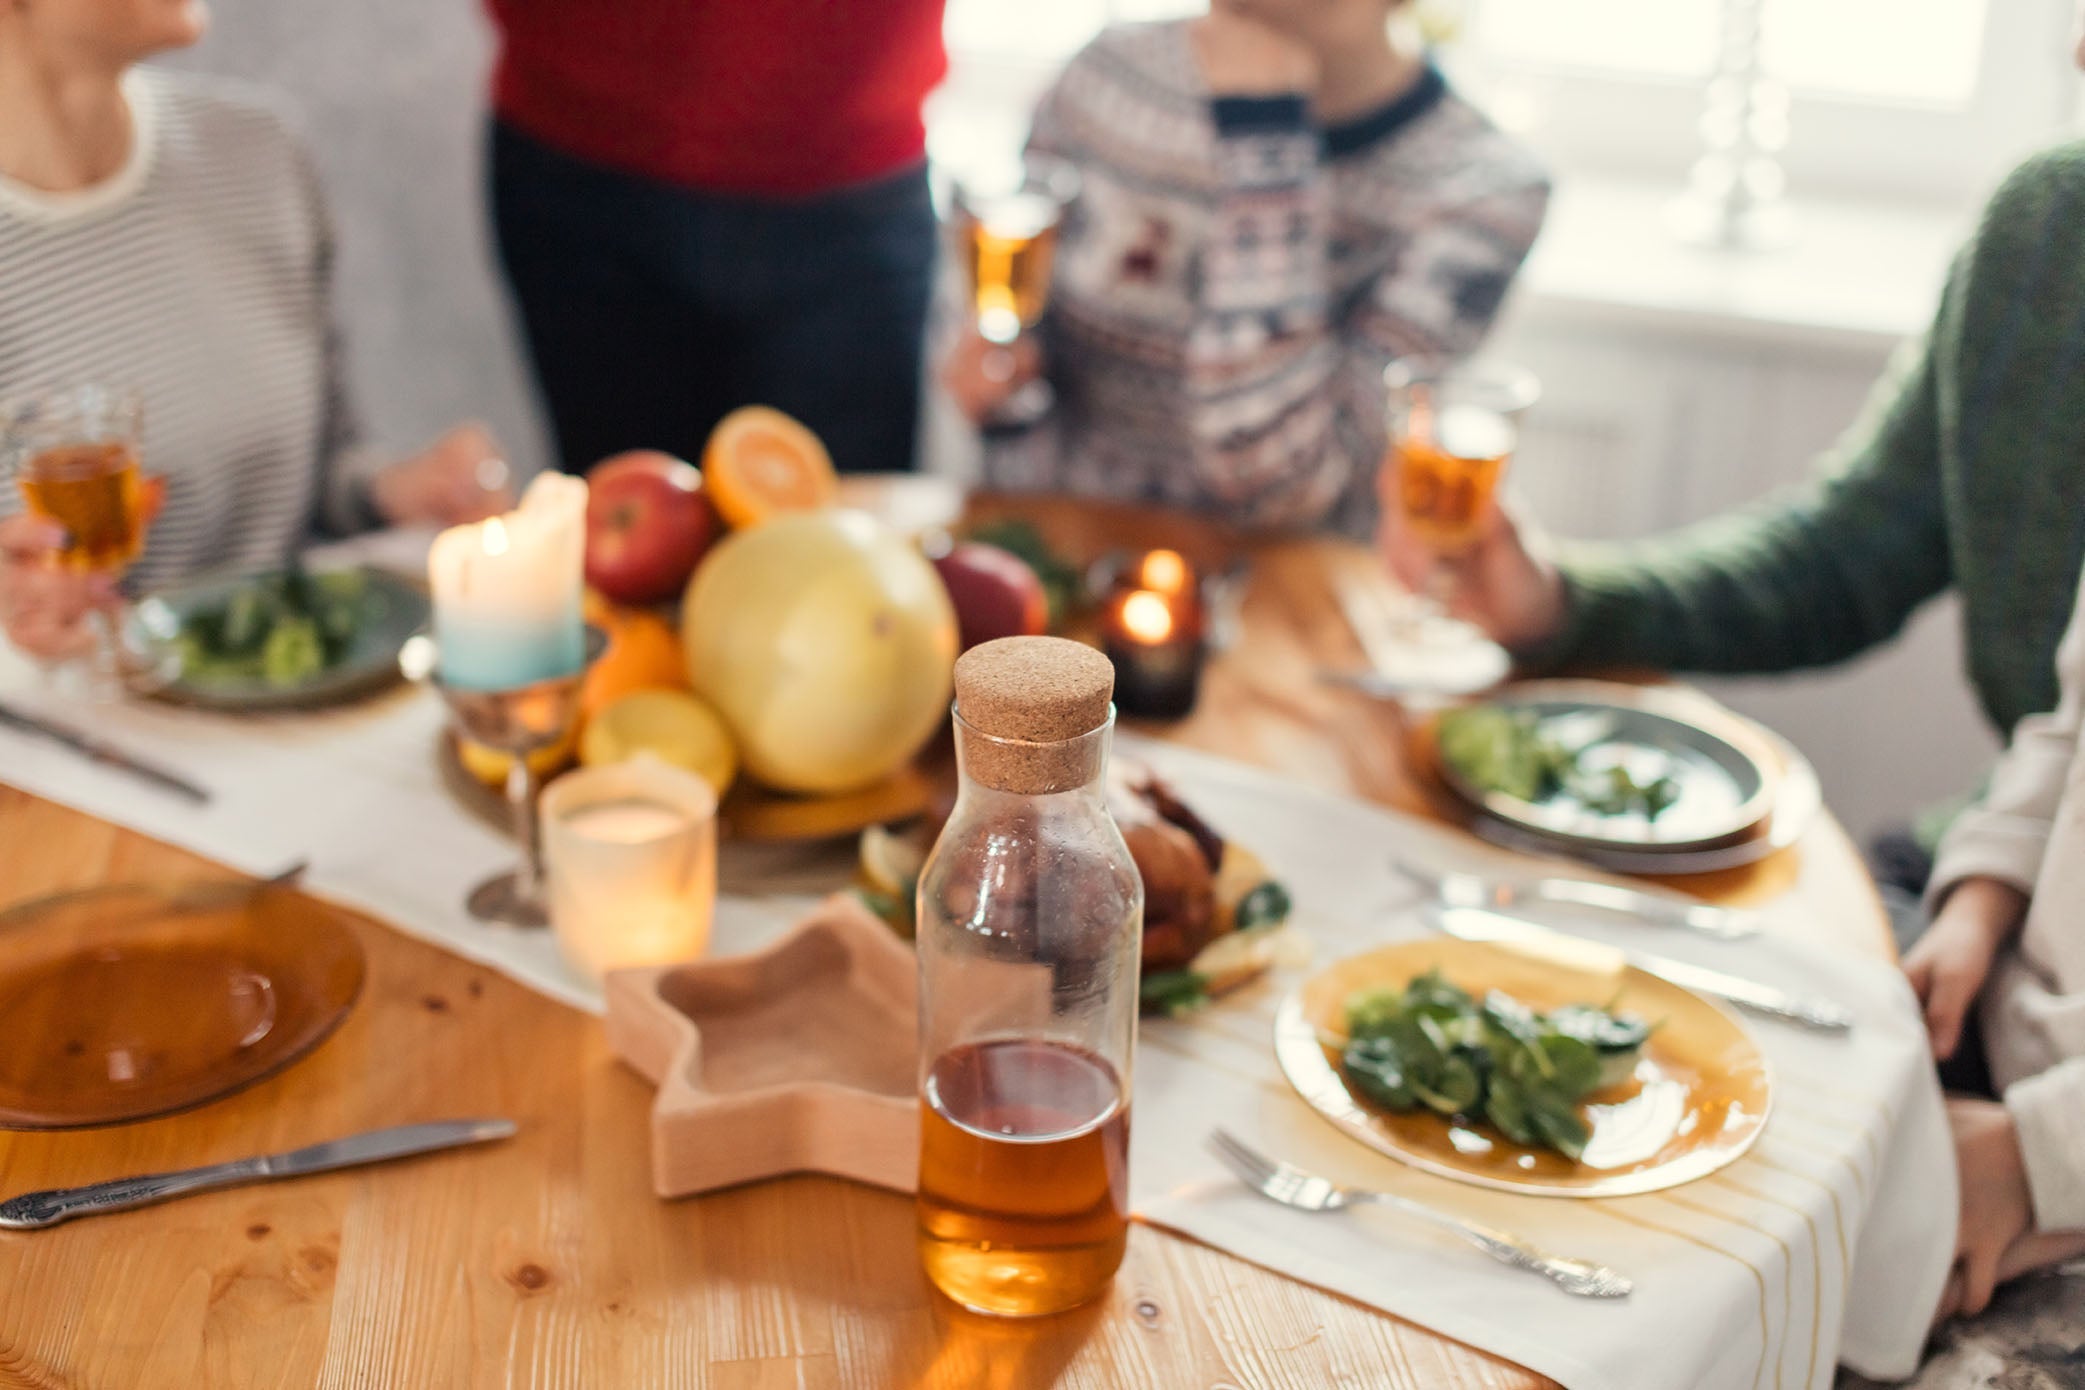 A group sitting around a dinner table celebrating the holidays with drinks